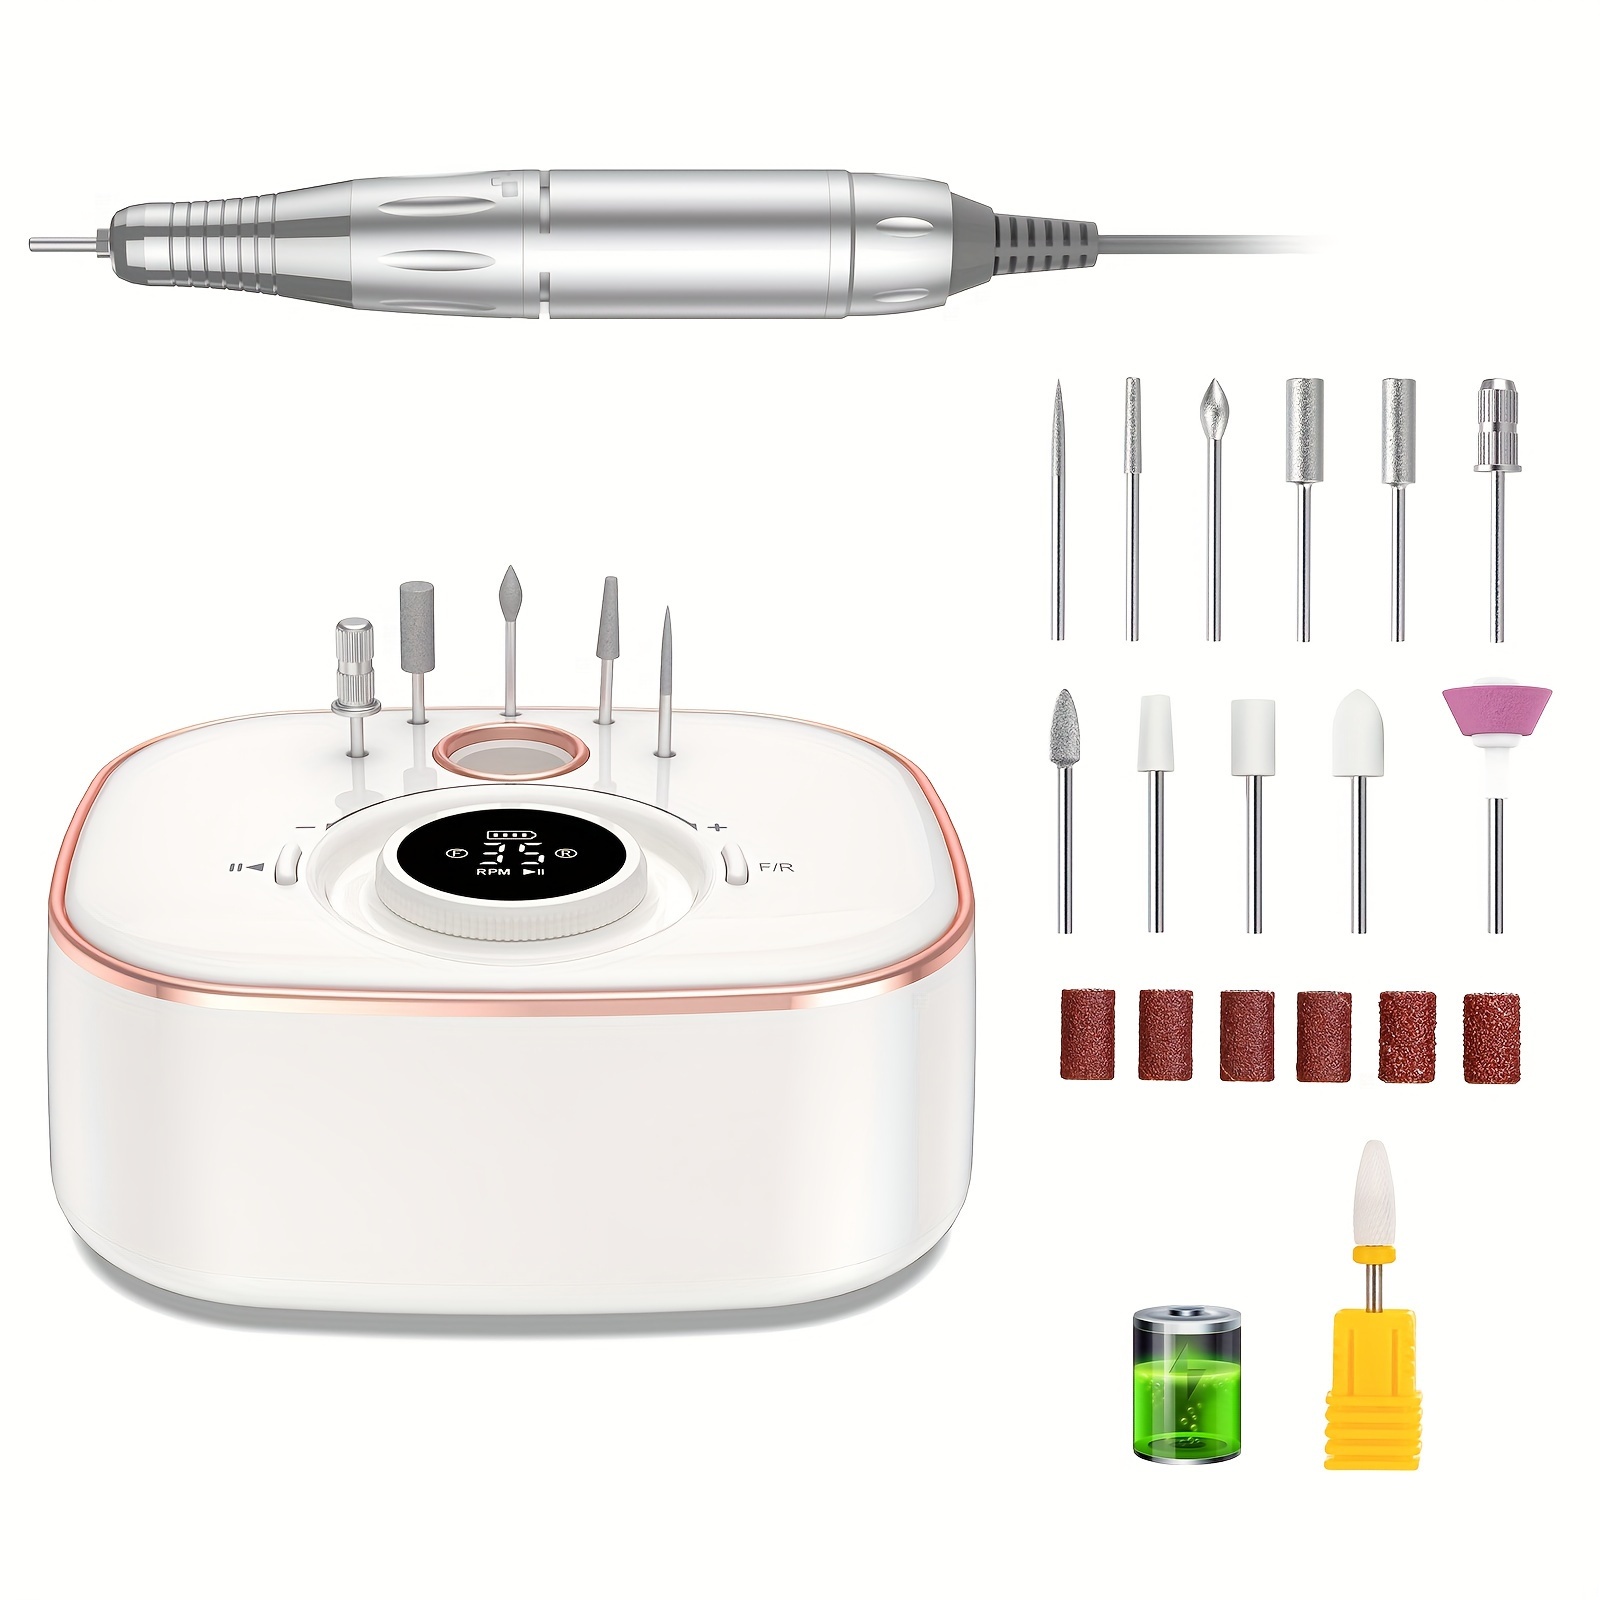 

Professional Electric Nail Drill Machine Set, Nail File Drill Machine, Manicure Pedicure Kit, Nail File Set For Home And Salon, Nail Buffer Manicure Pedicure Polishing Tools